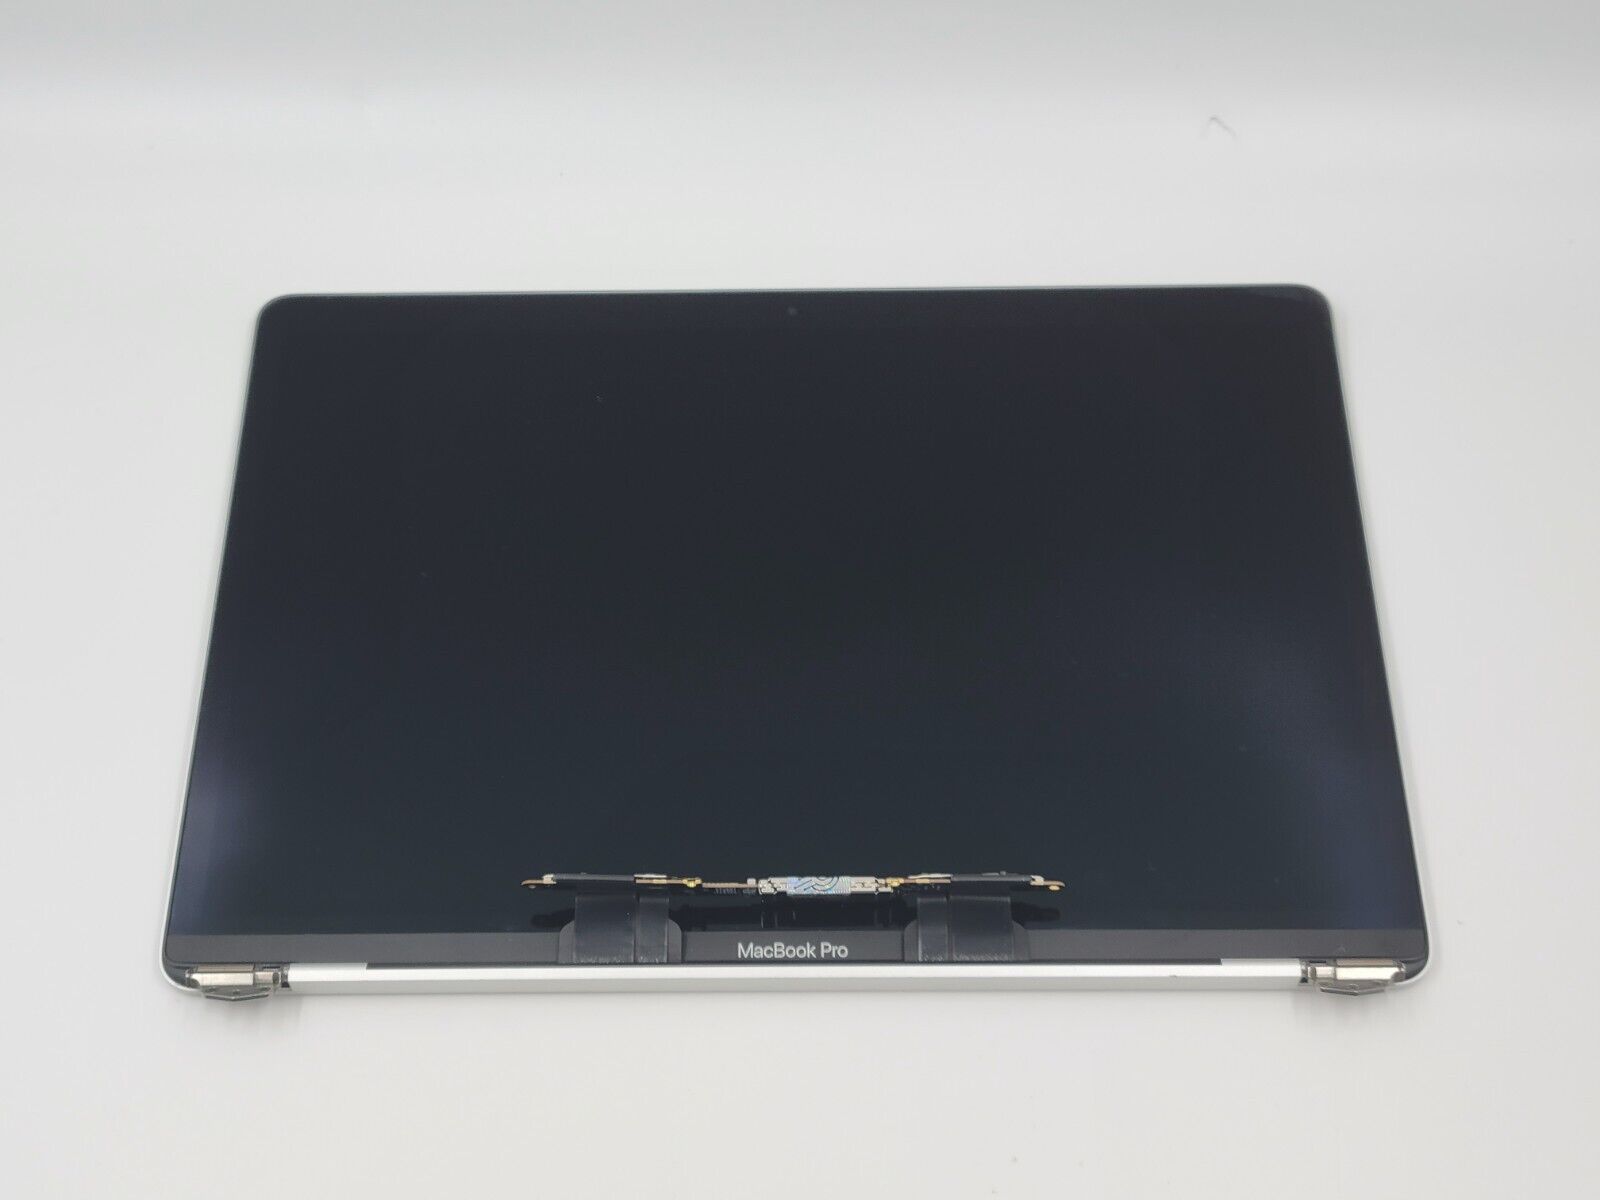 OEM Apple MacBook Pro 13 A1706 A1708 2017 LCD Screen Display Assembly Silver